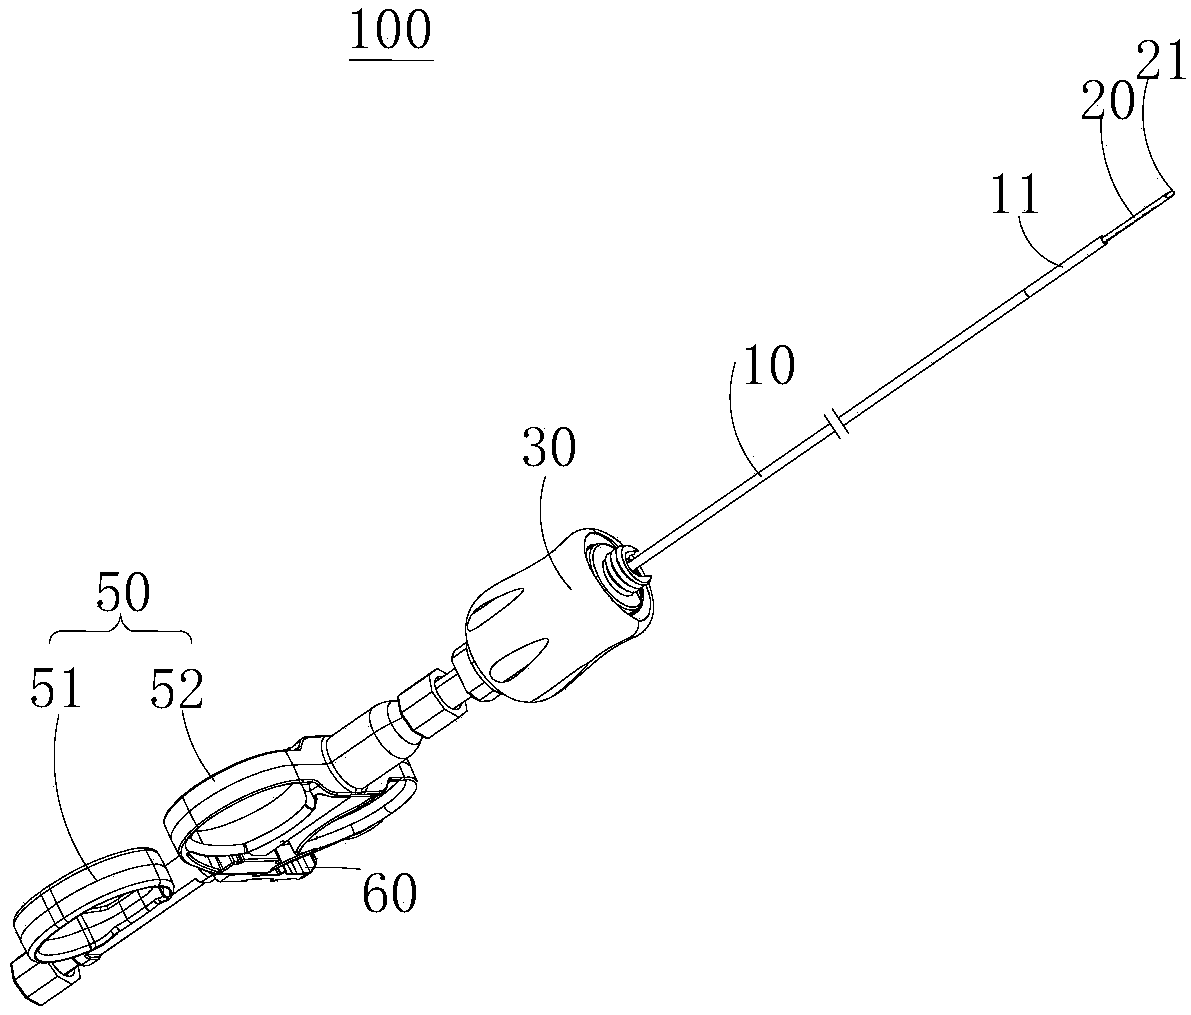 Bendable biopsy needle and biopsy system